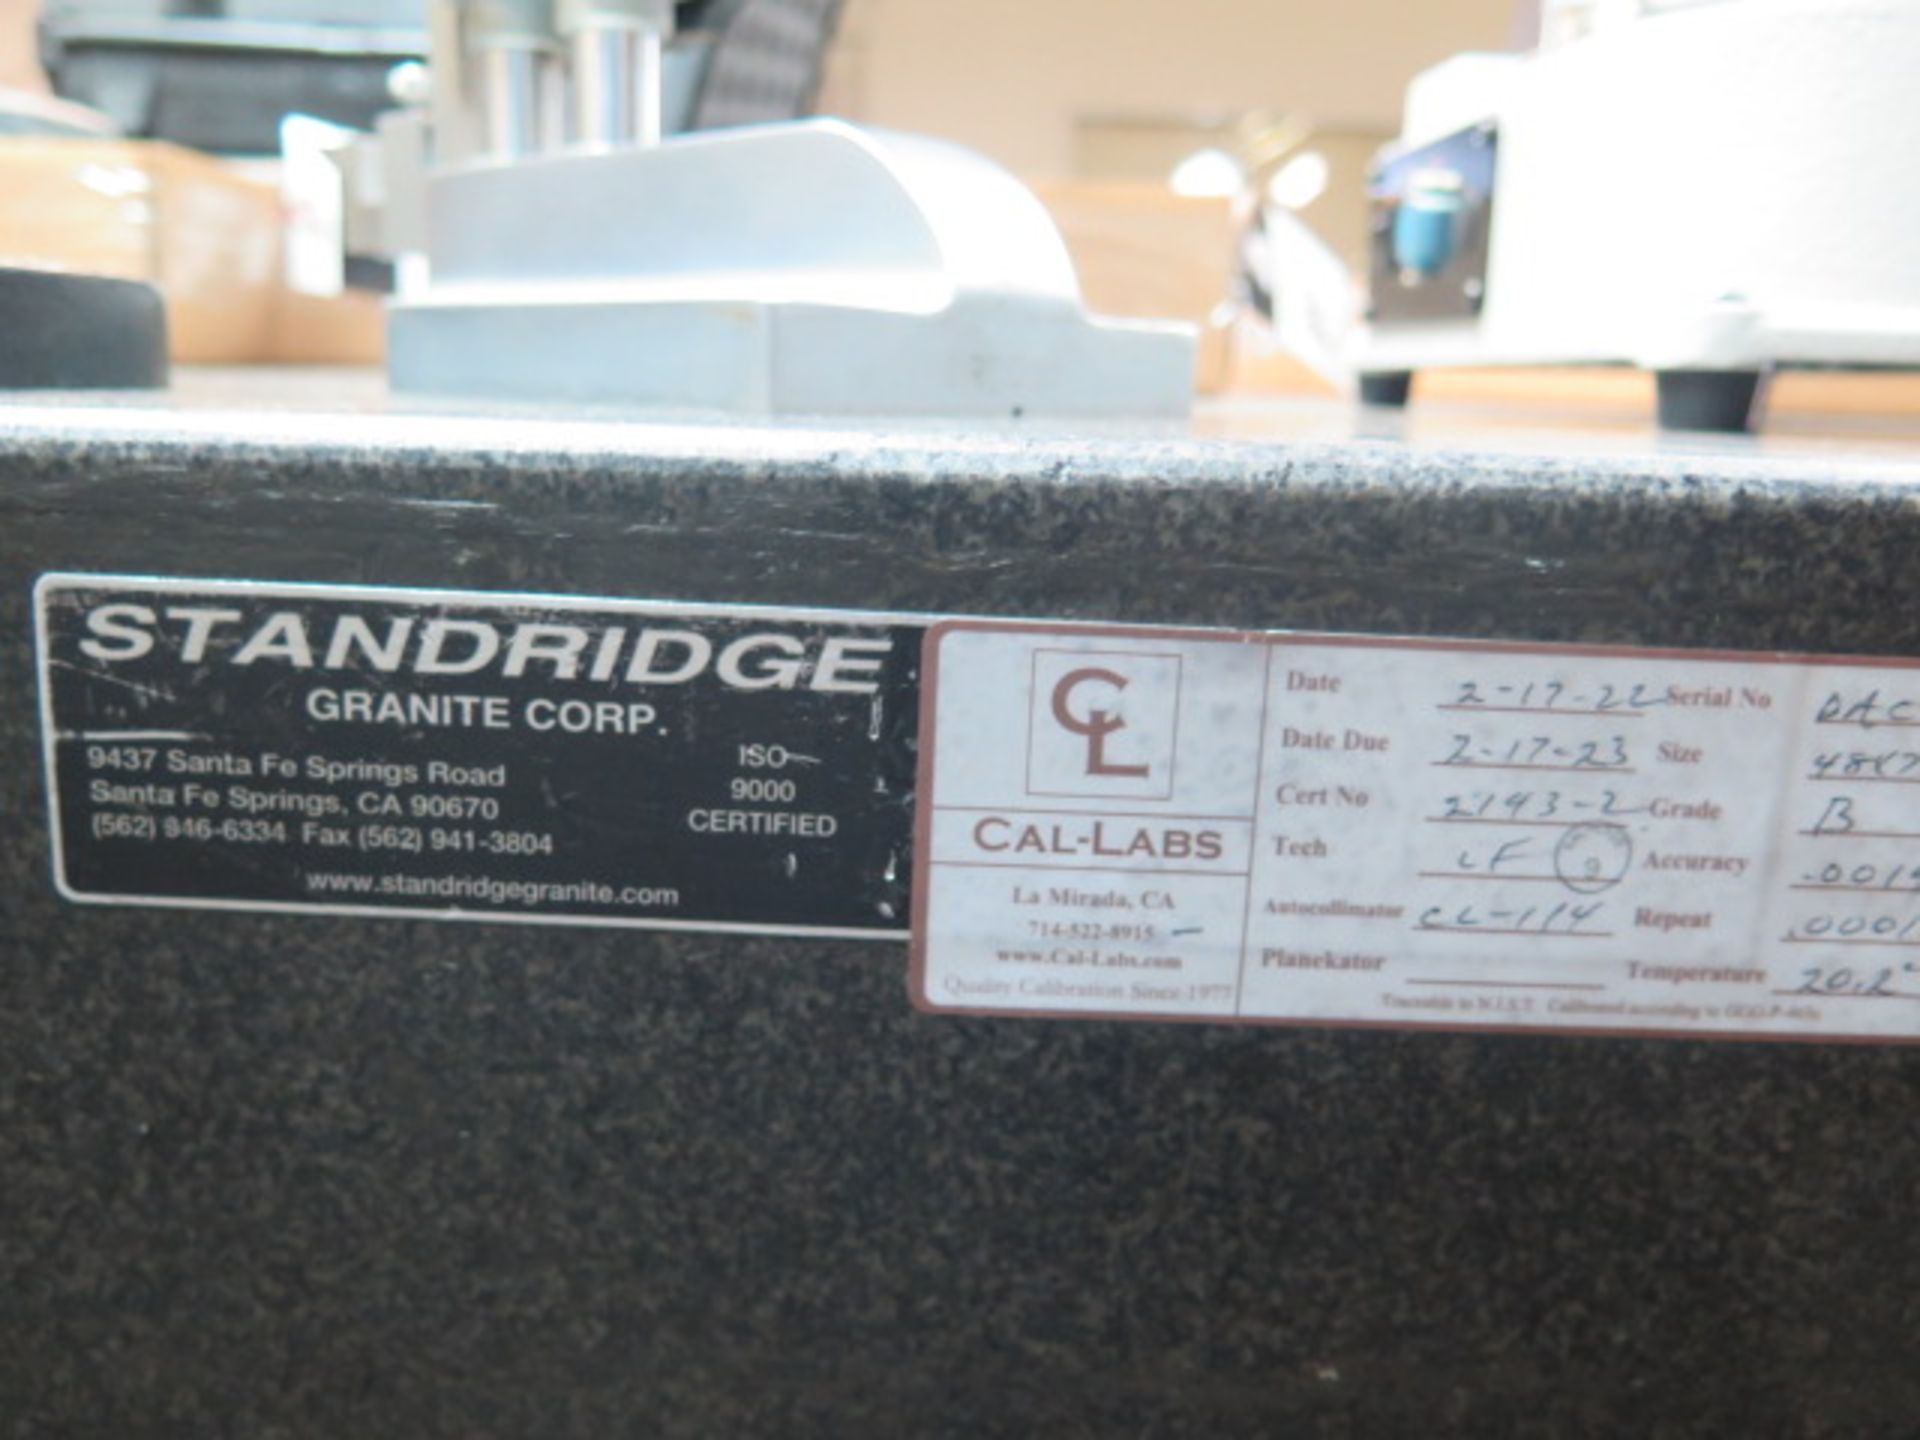 Standridge 48" x 72" x 6" Granite Surface Plate w/ Stand (SOLD AS-IS - NO WARRANTY) - Image 7 of 7